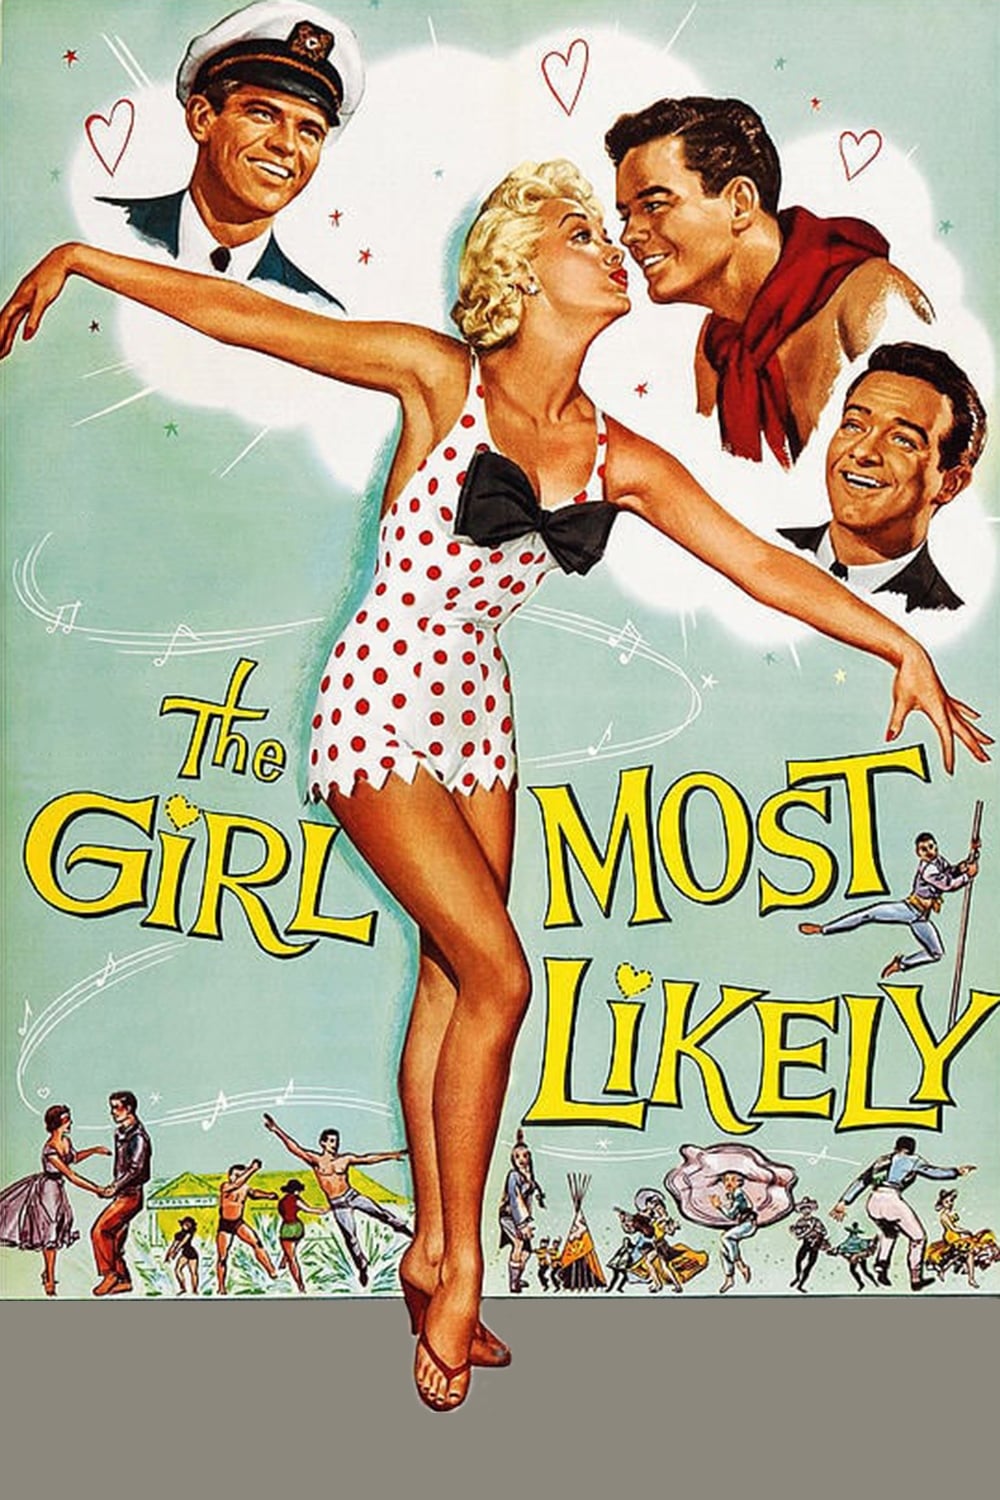 The Girl Most Likely (1958)